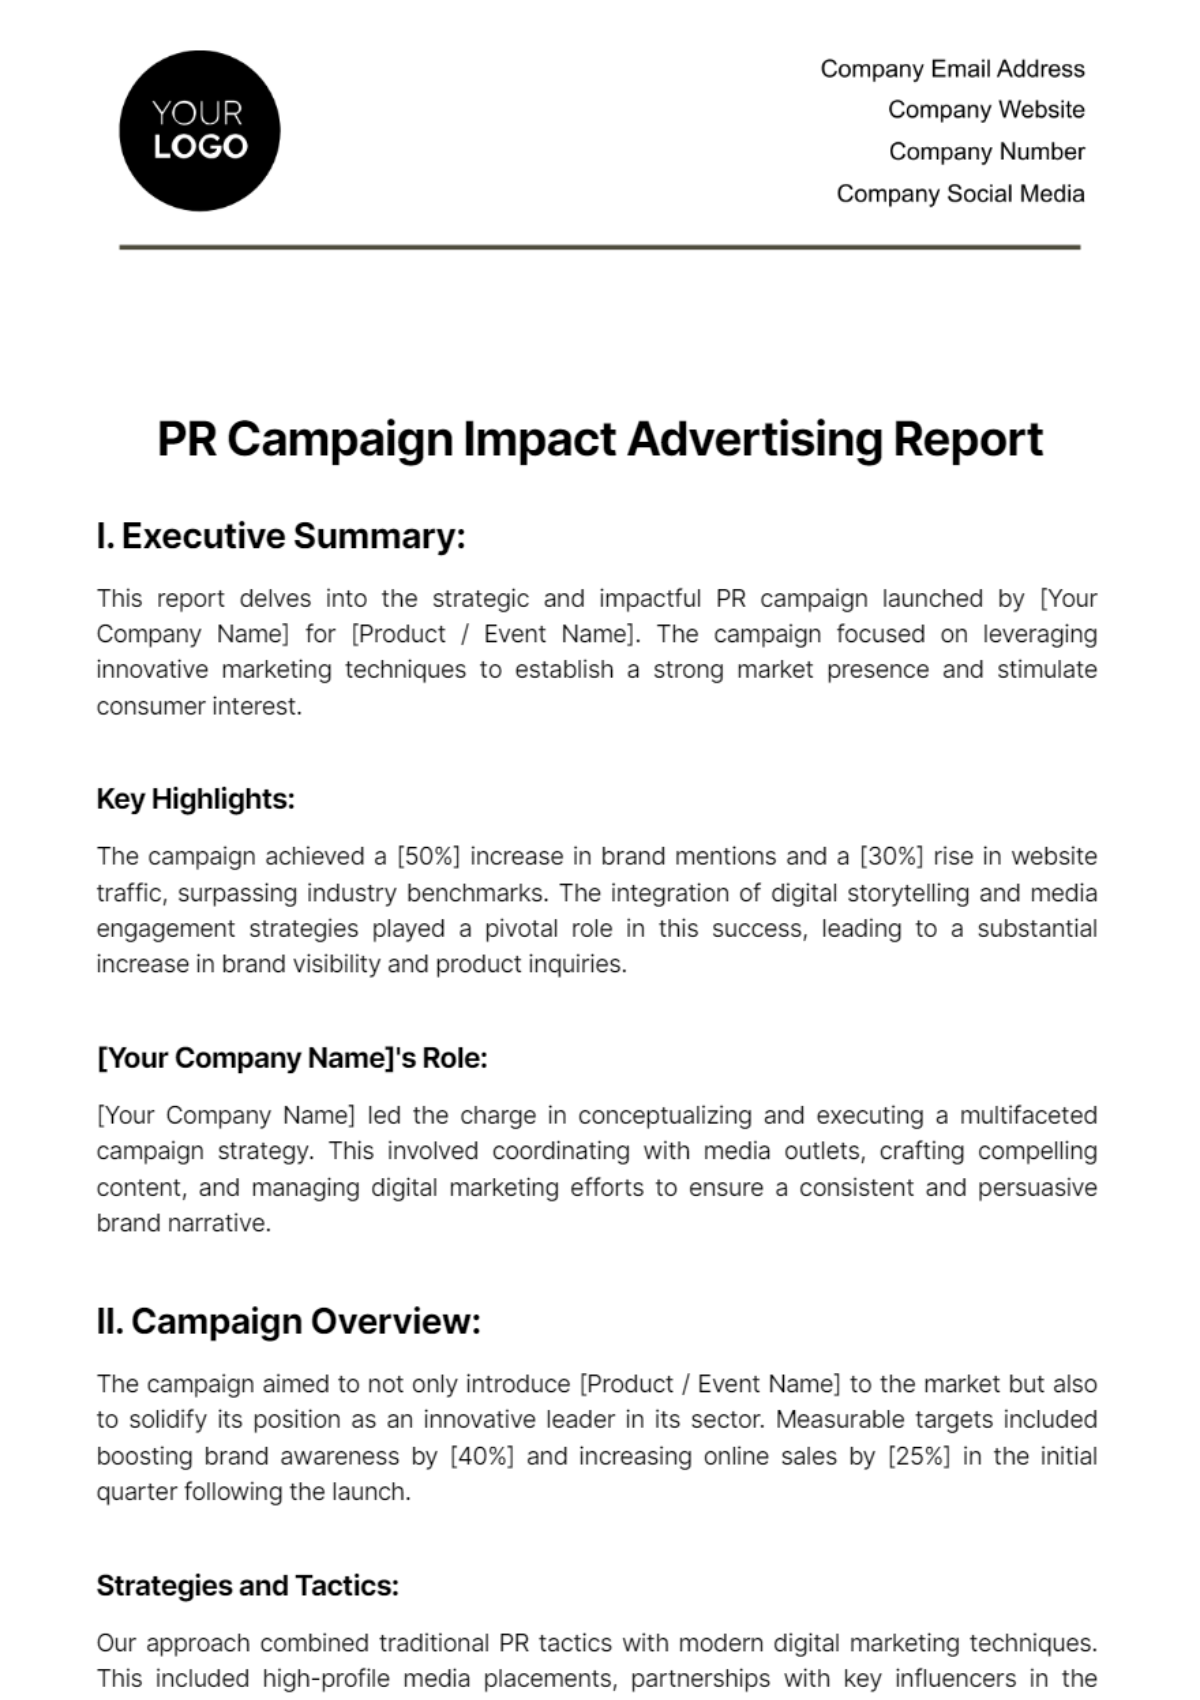 Free PR Campaign Impact Advertising Report Template